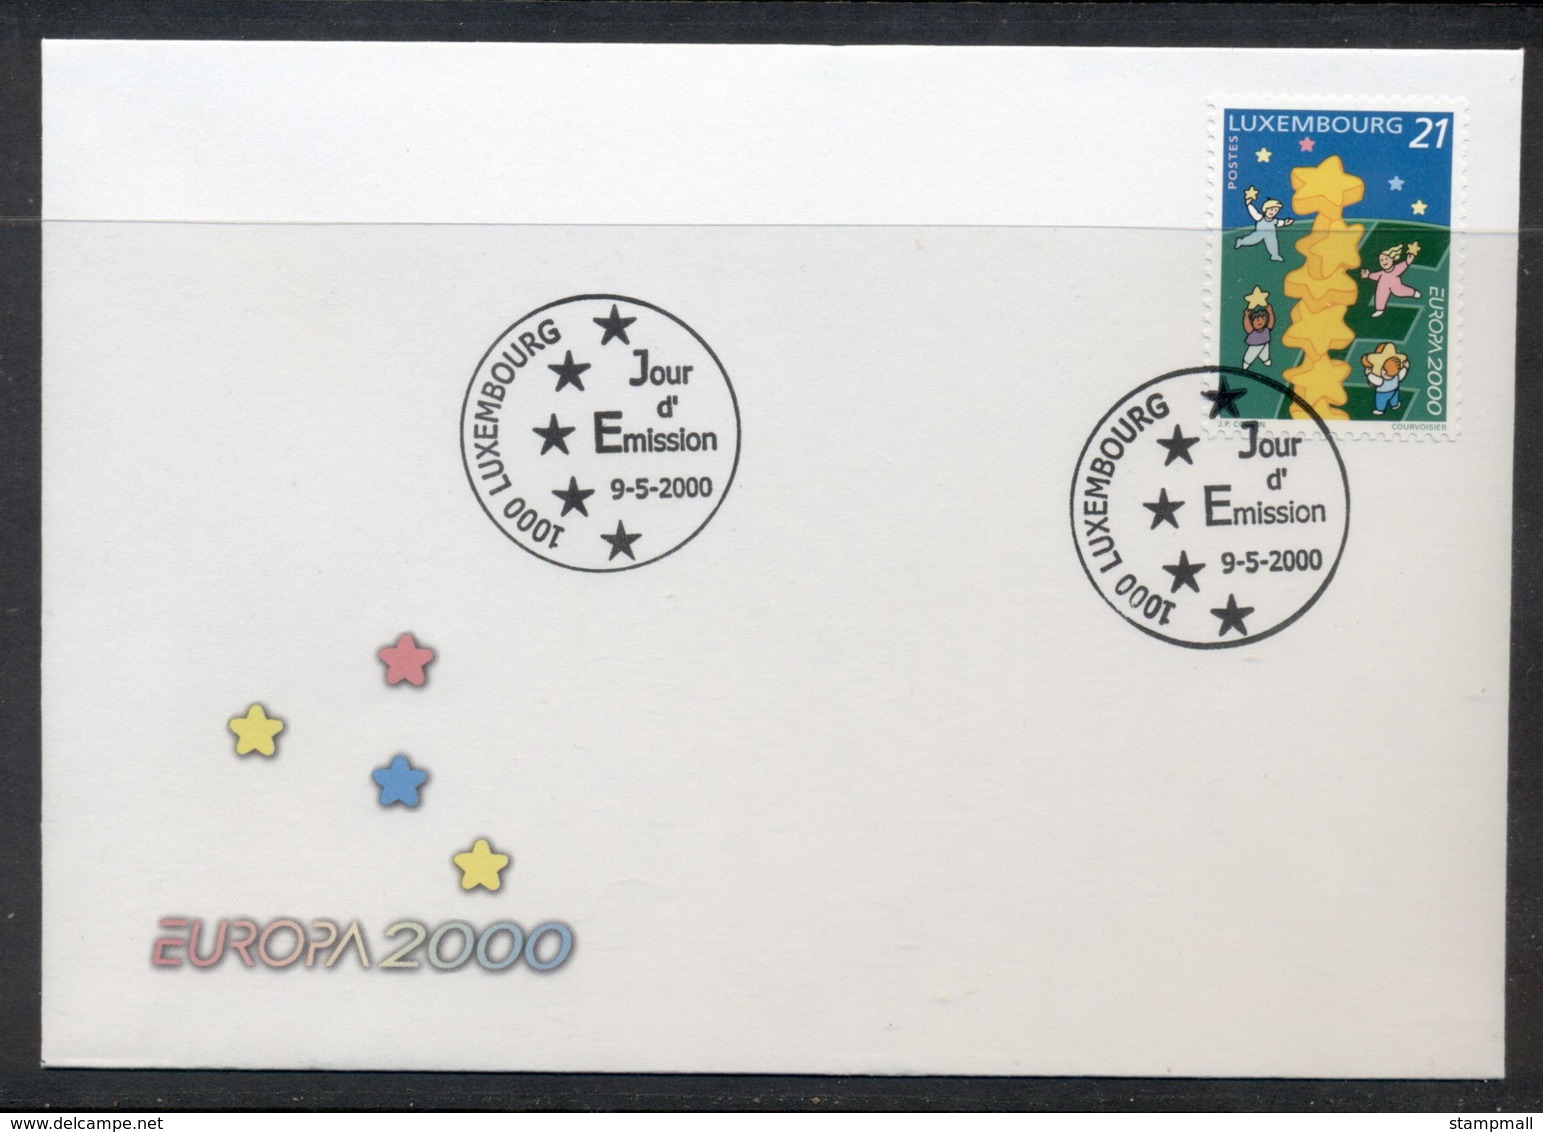 Luxembourg 2000 Europa Field Of Stars FDC - FDC